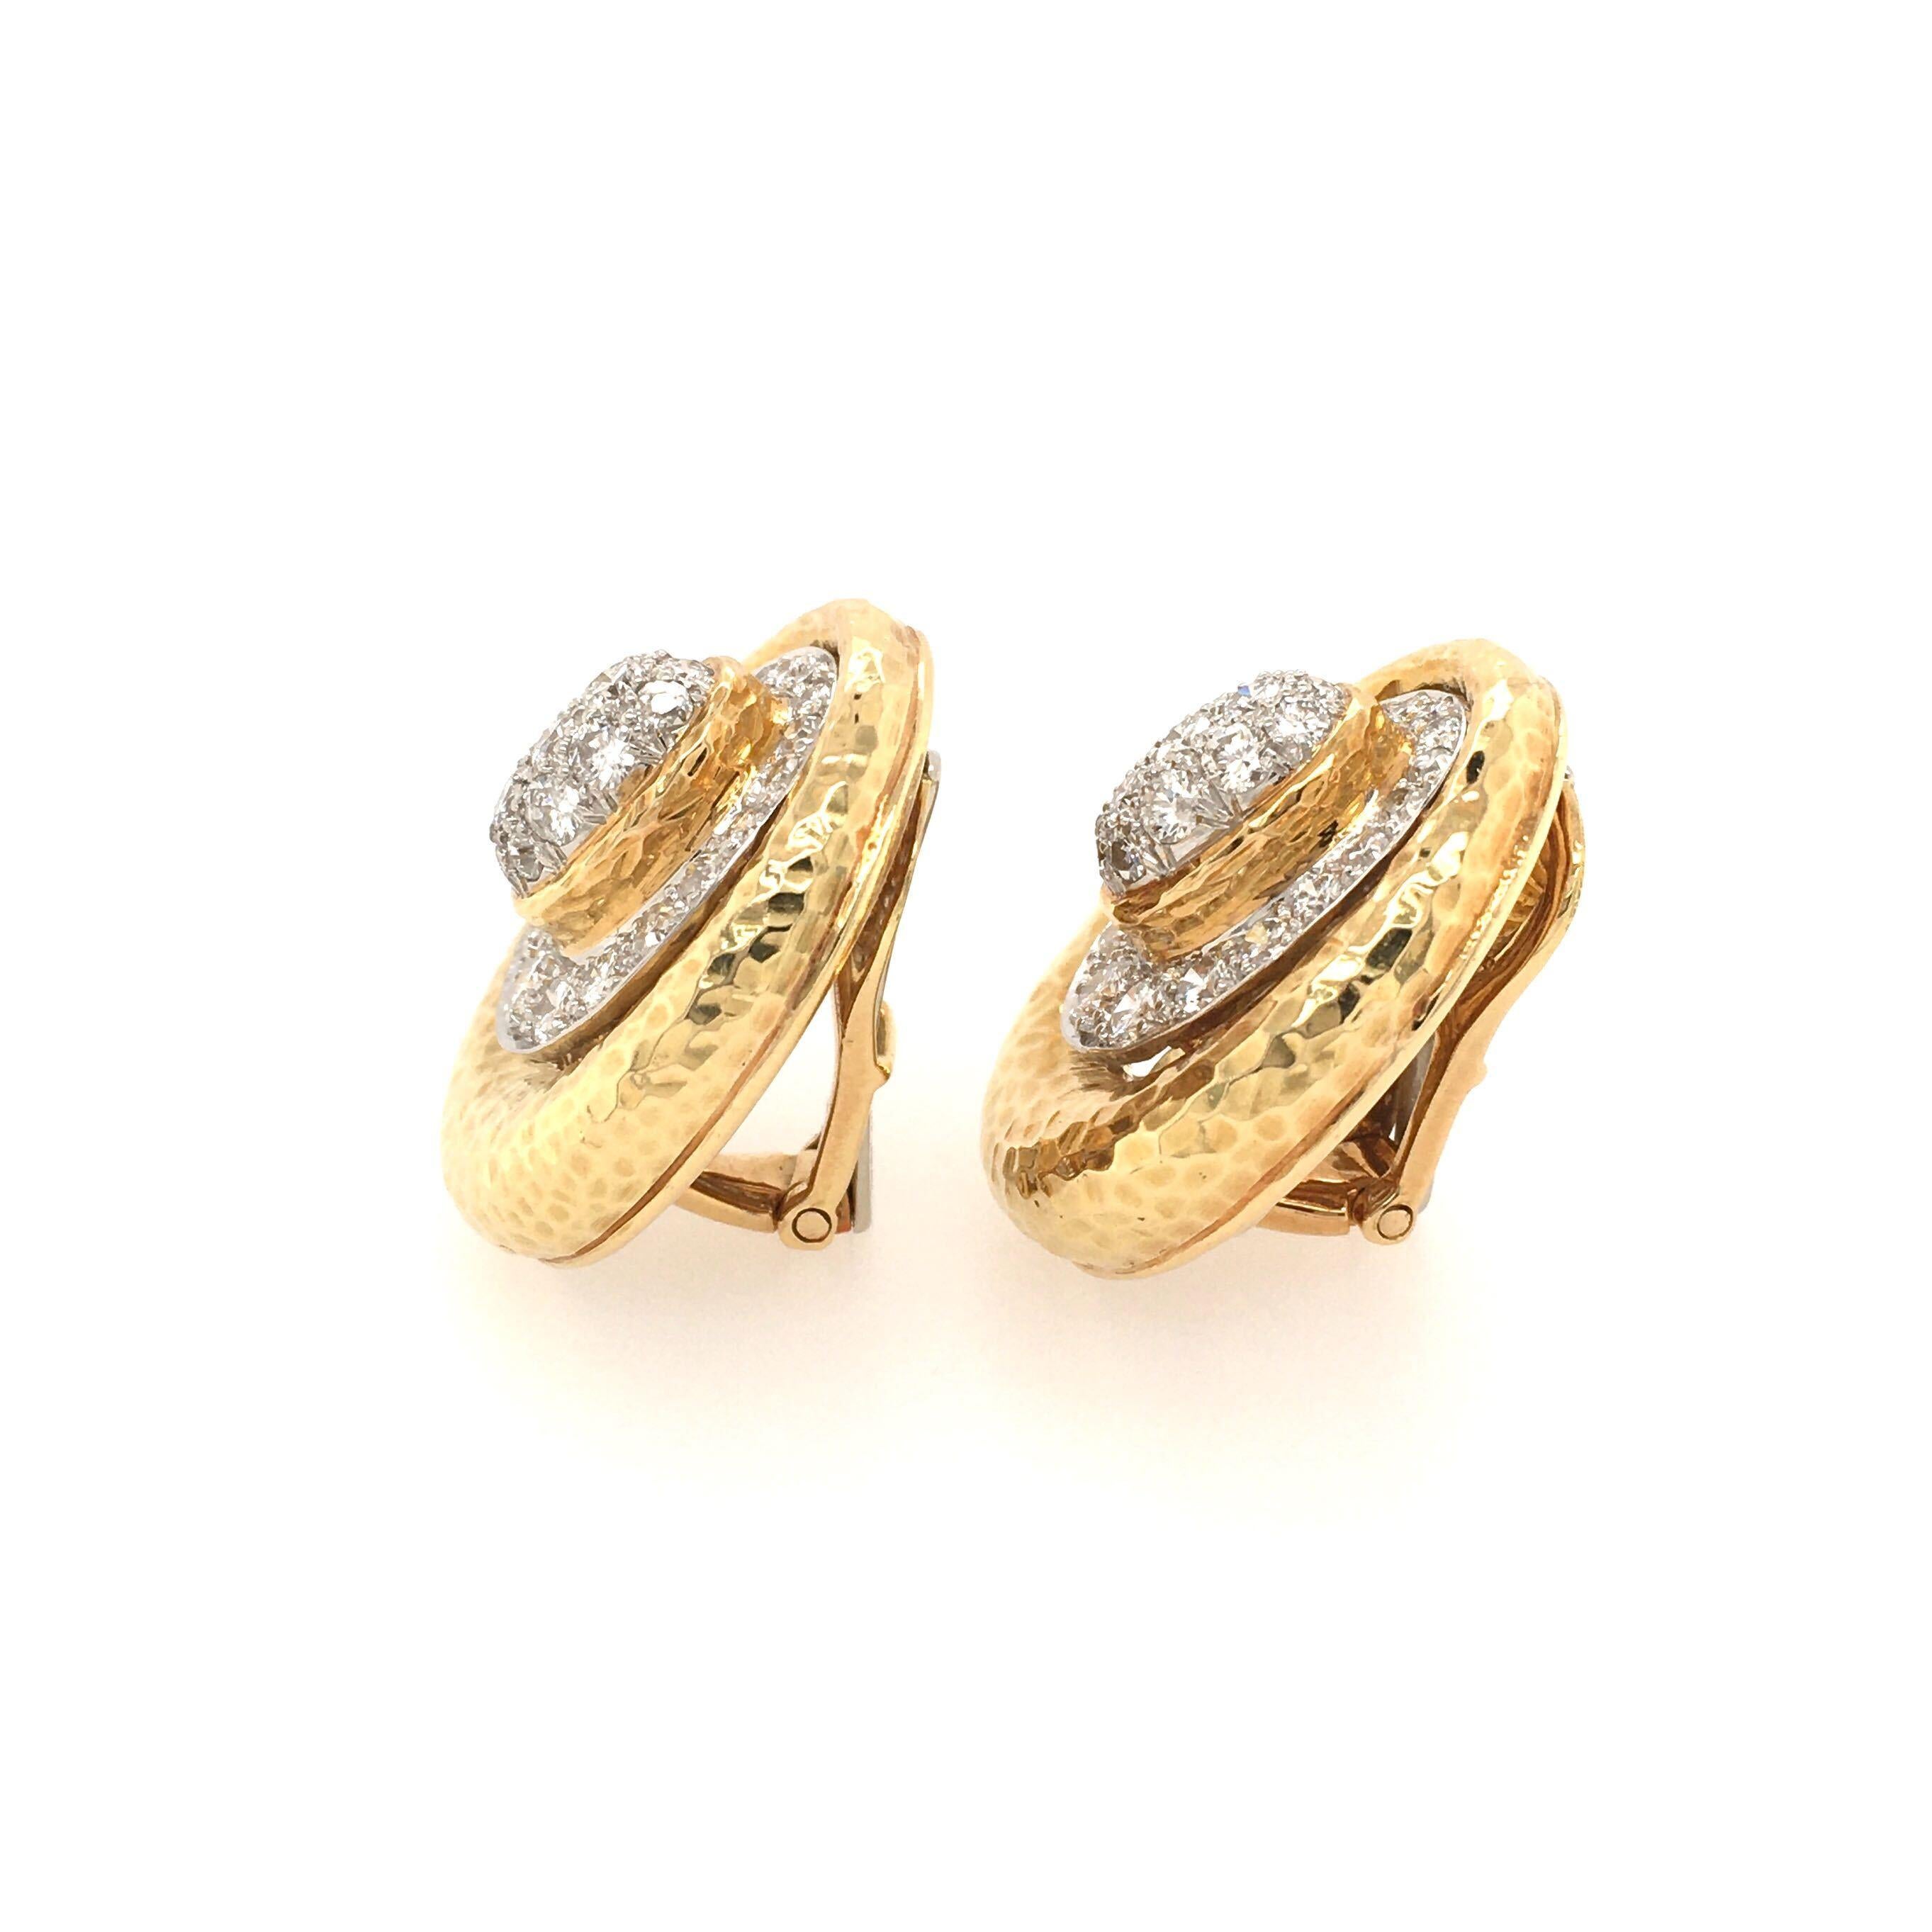 A pair of 18 karat yellow gold and diamond earrings. David Webb. Circa 1970. Of oval hammered design, enhanced by pave set diamonds. Sixty two (62) diamonds weigh approximately 3.25 carats. Length is approximately 1 inch, gross weight is